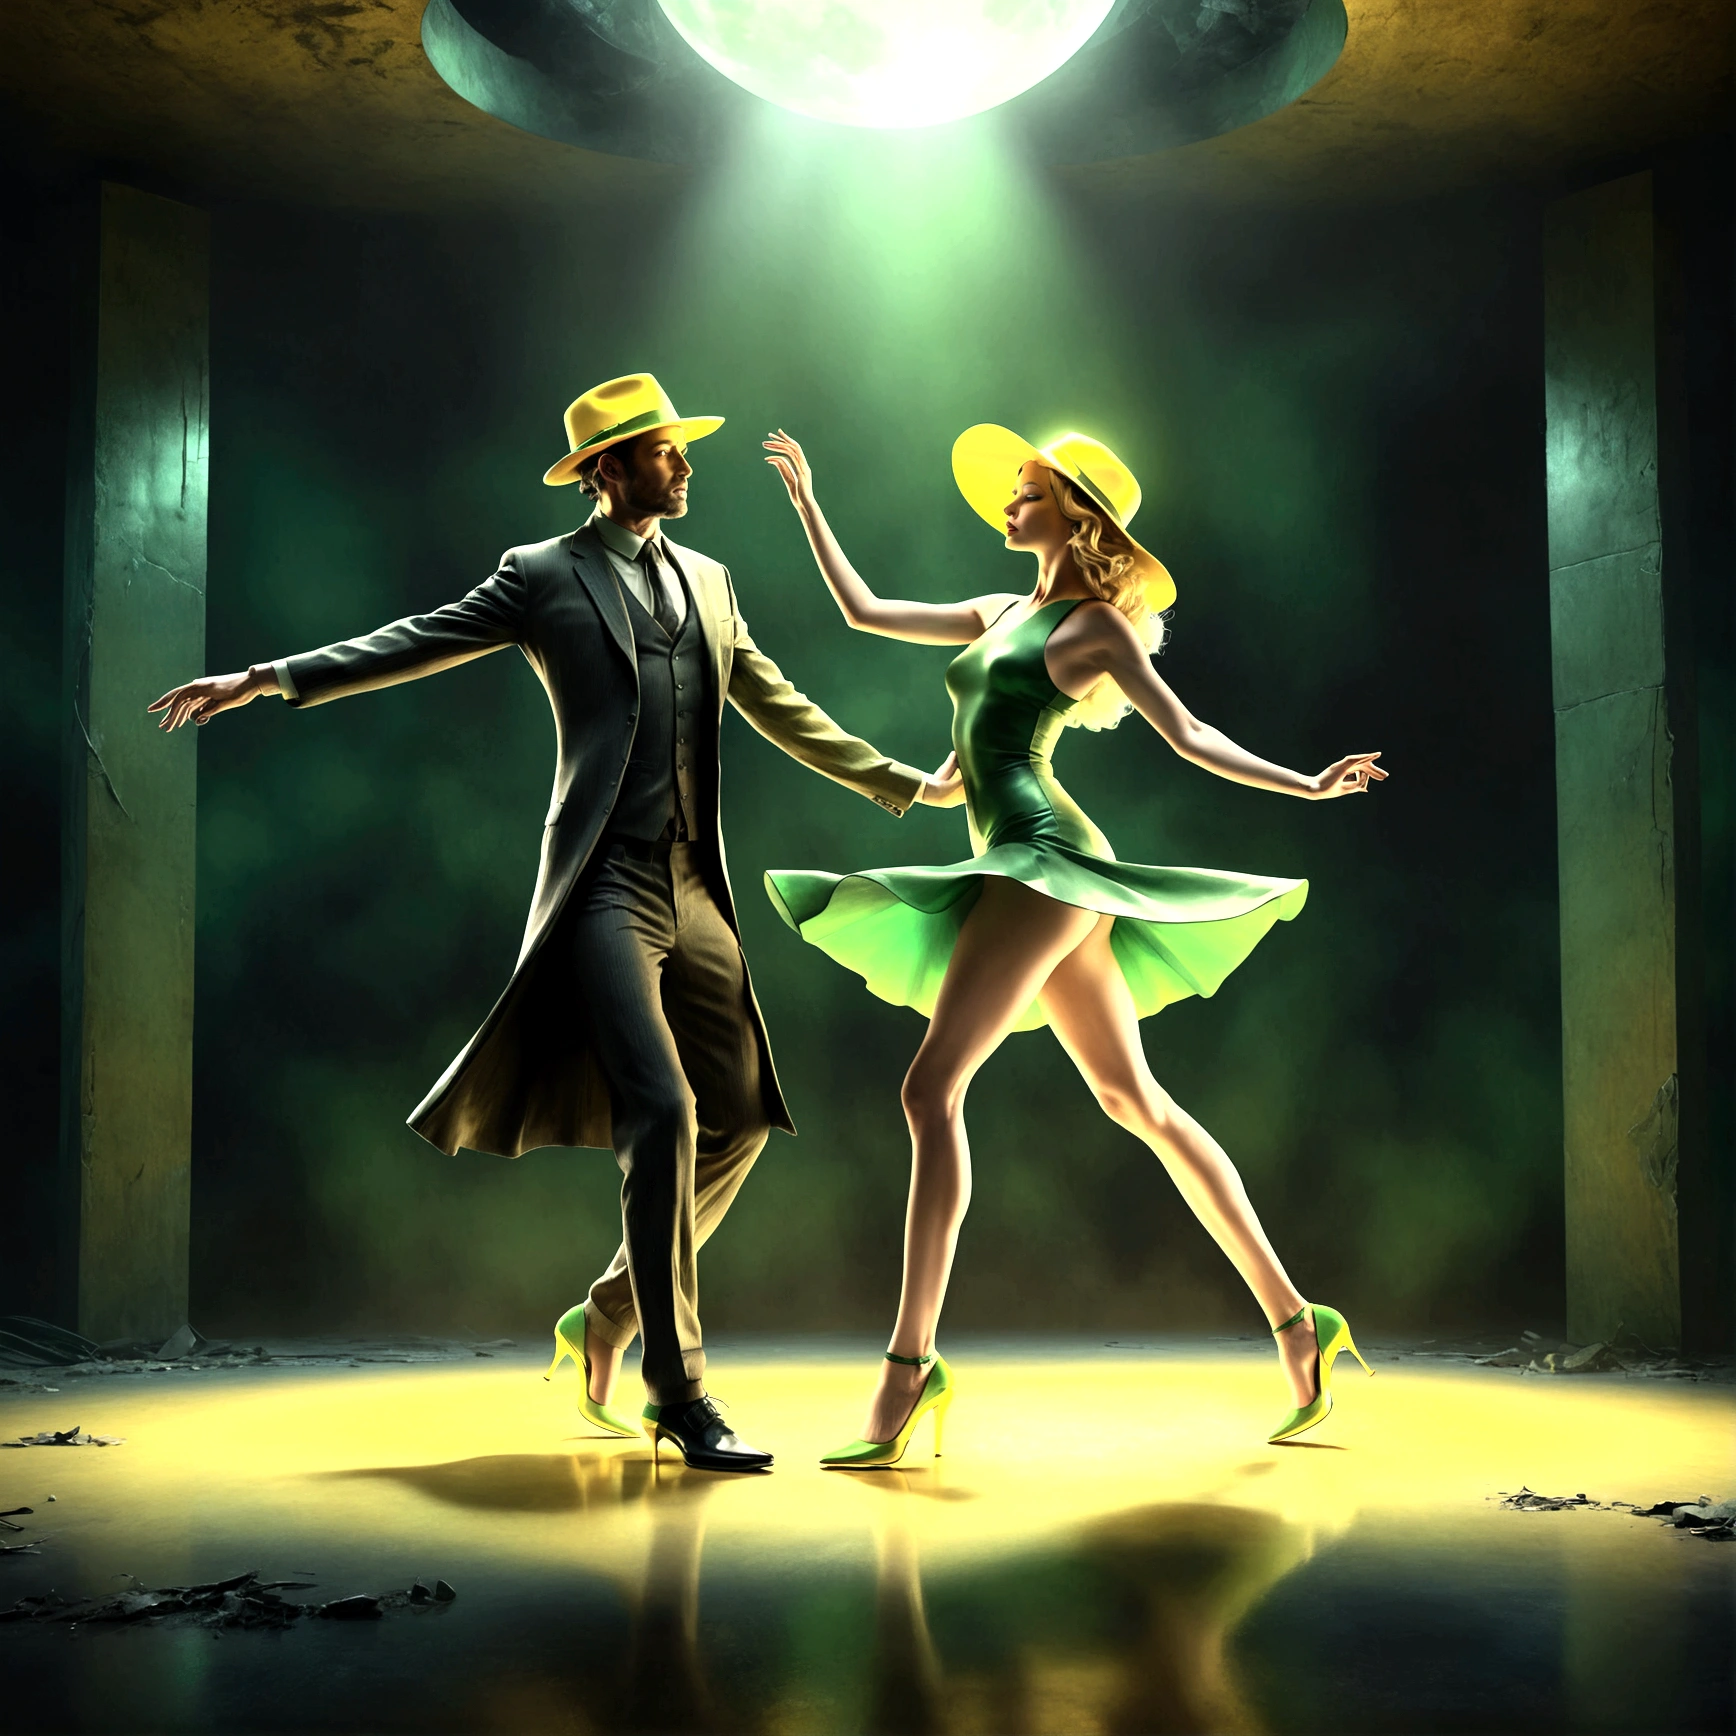 A fascinating 3D image in national style, created as a digital painting shows a mystical couple with empty body, she dances gracefully. the background is black. Backlight. yellow hat and green high heels. The production is a combination of post-apocalyptic futurism and hyperrealist